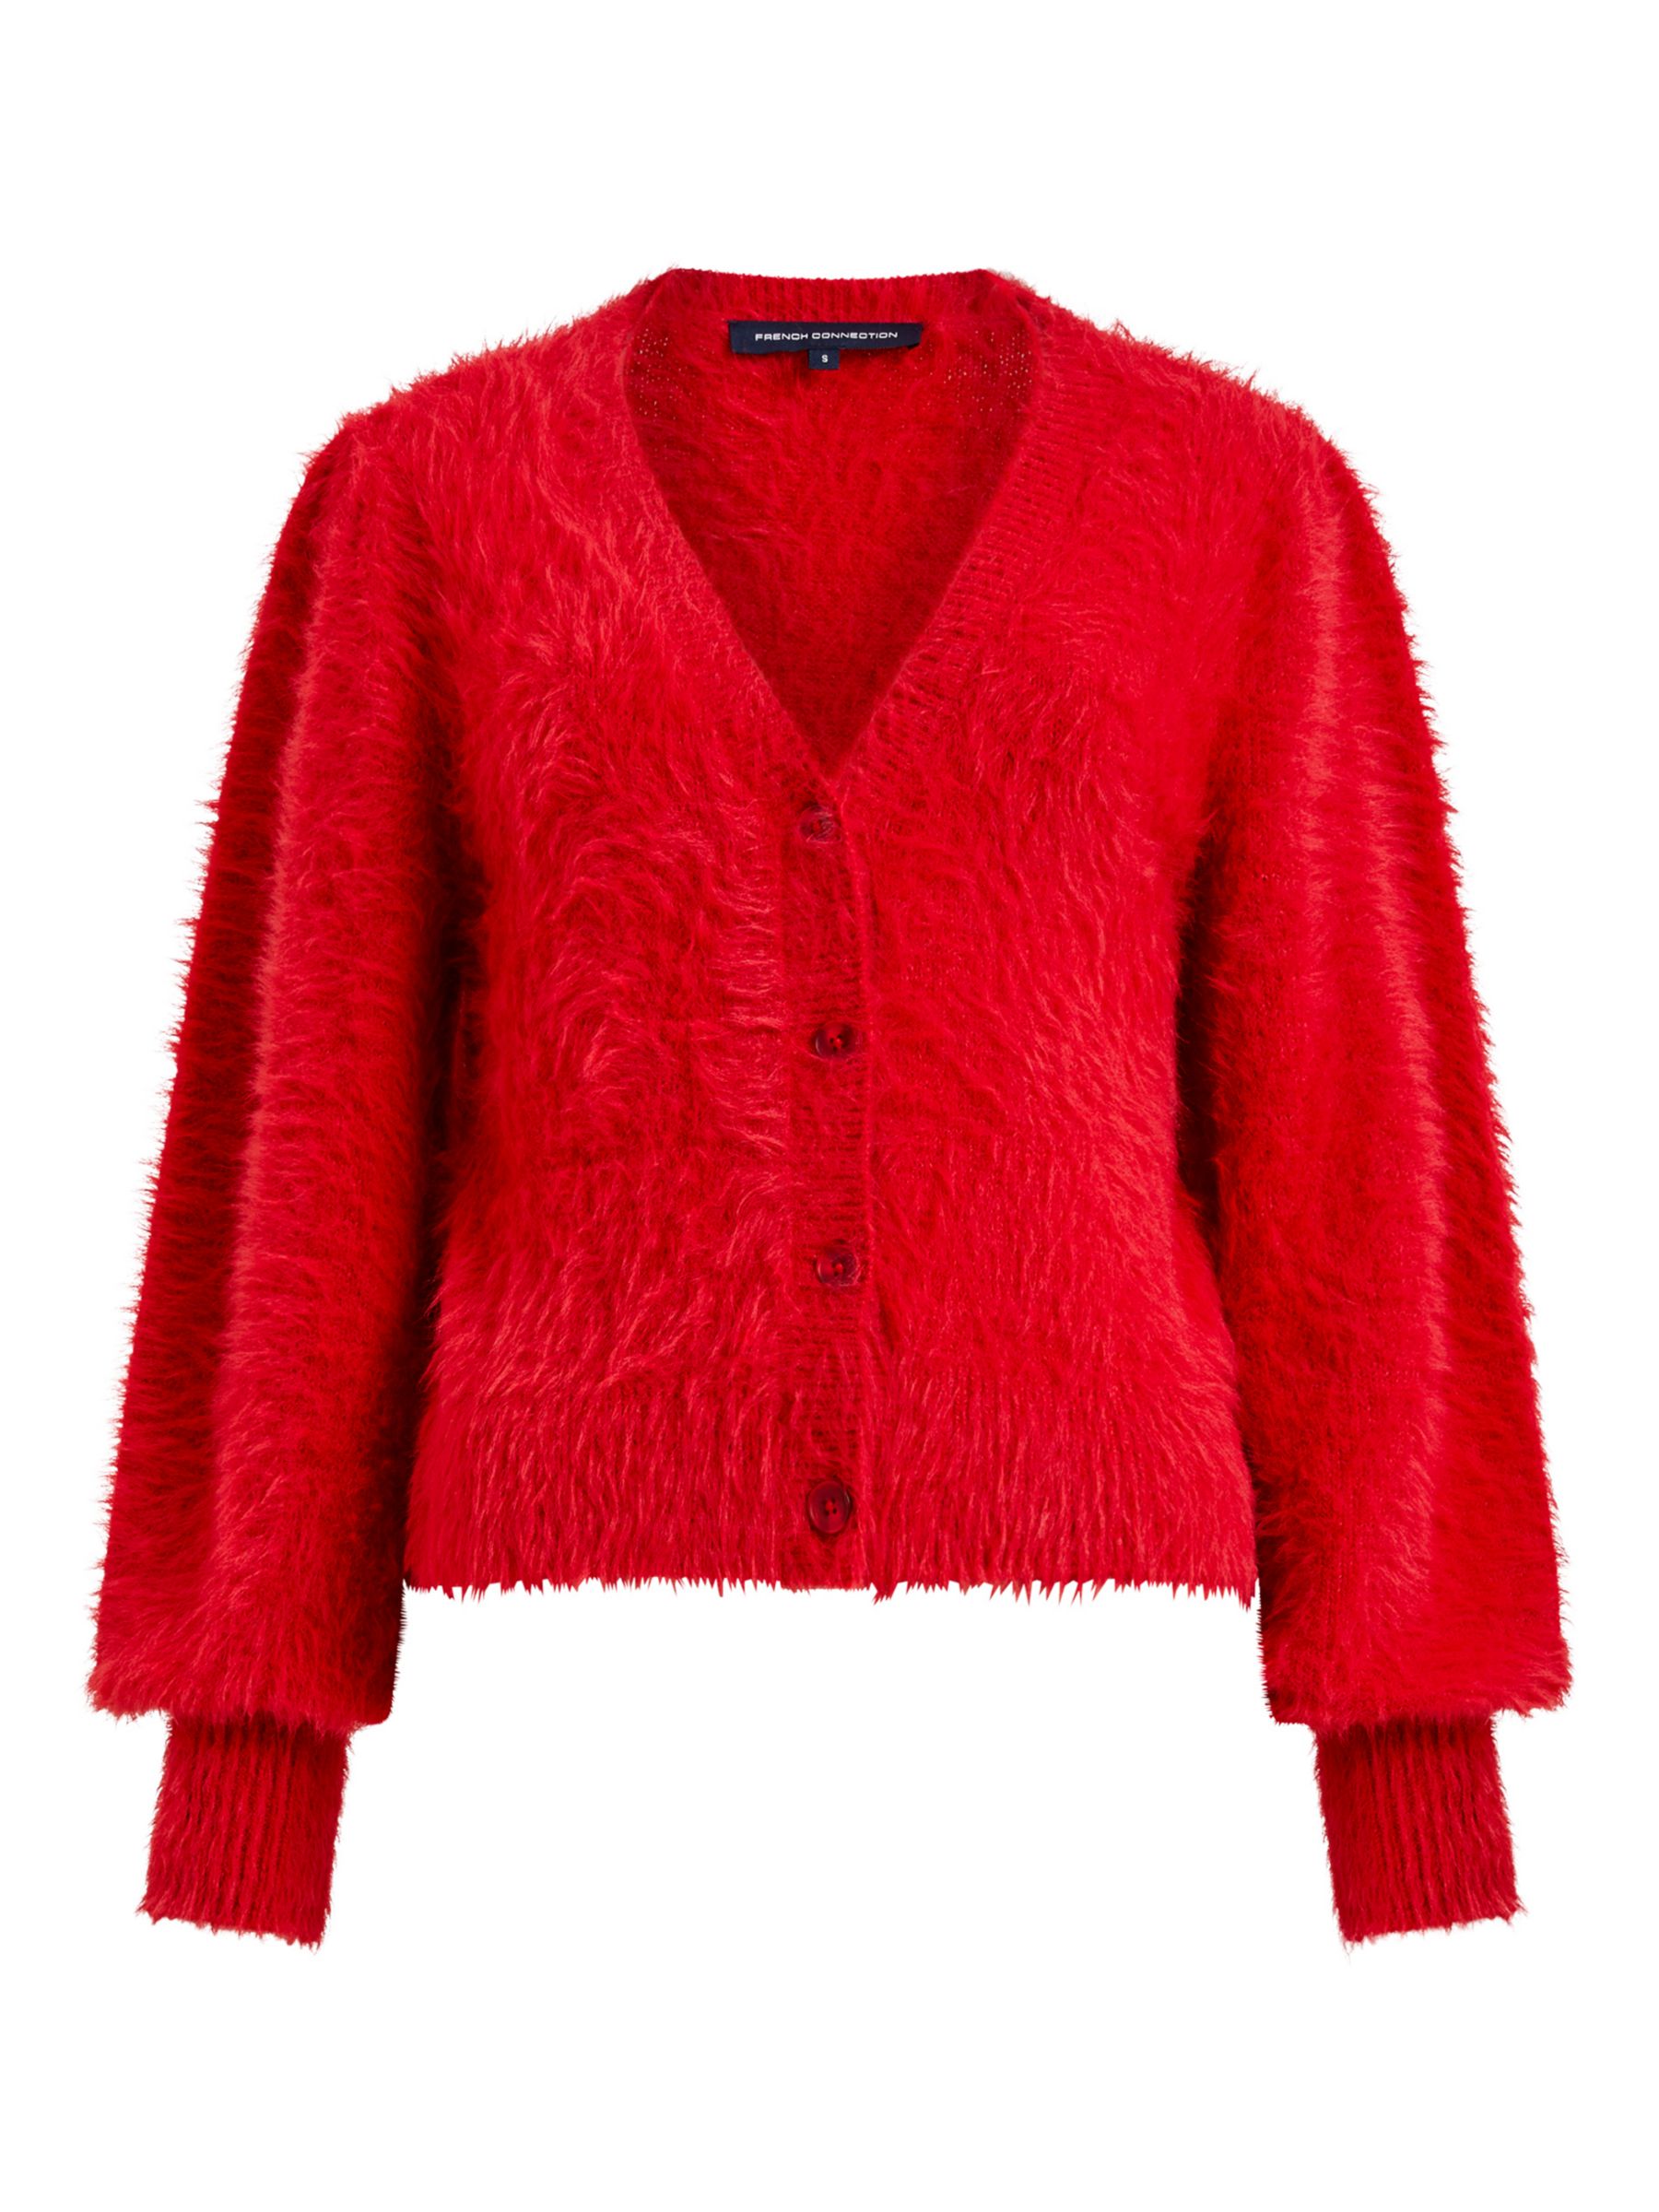 French Connection Meena Fluffy Cardigan, Lollipop at John Lewis & Partners